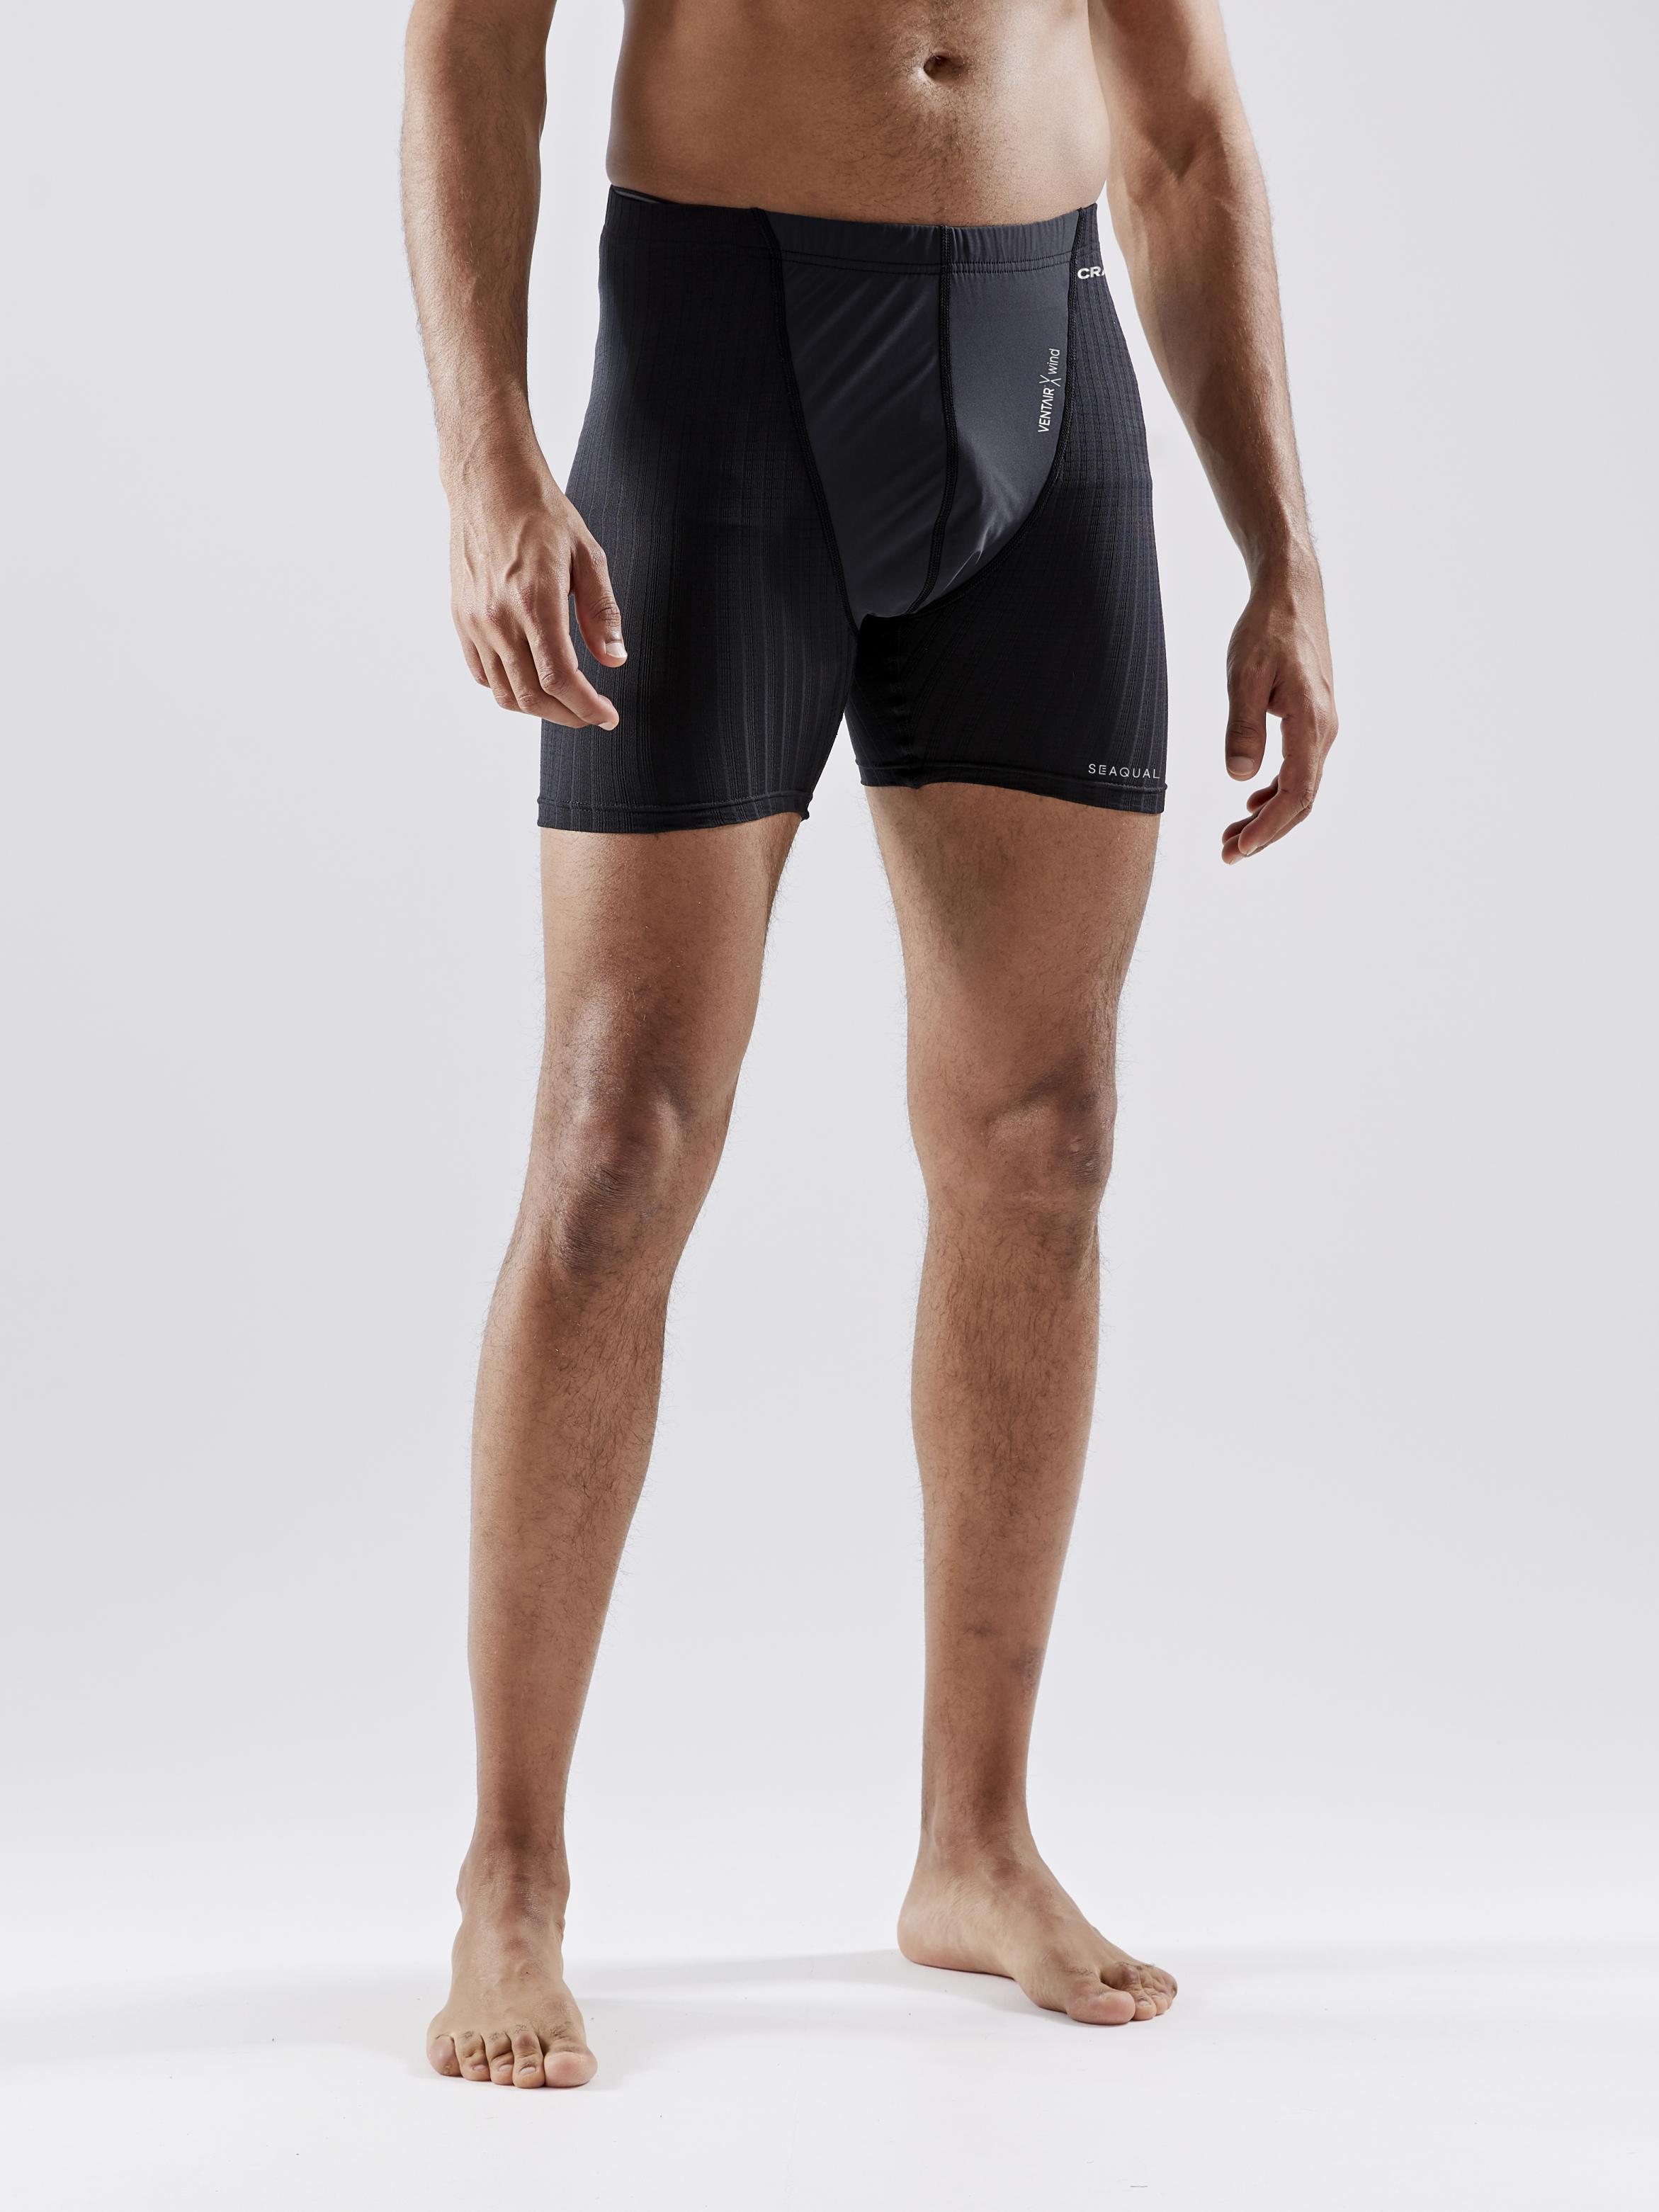 Image of MEN'S ACTIVE EXTREME X WIND BOXER BASELAYER